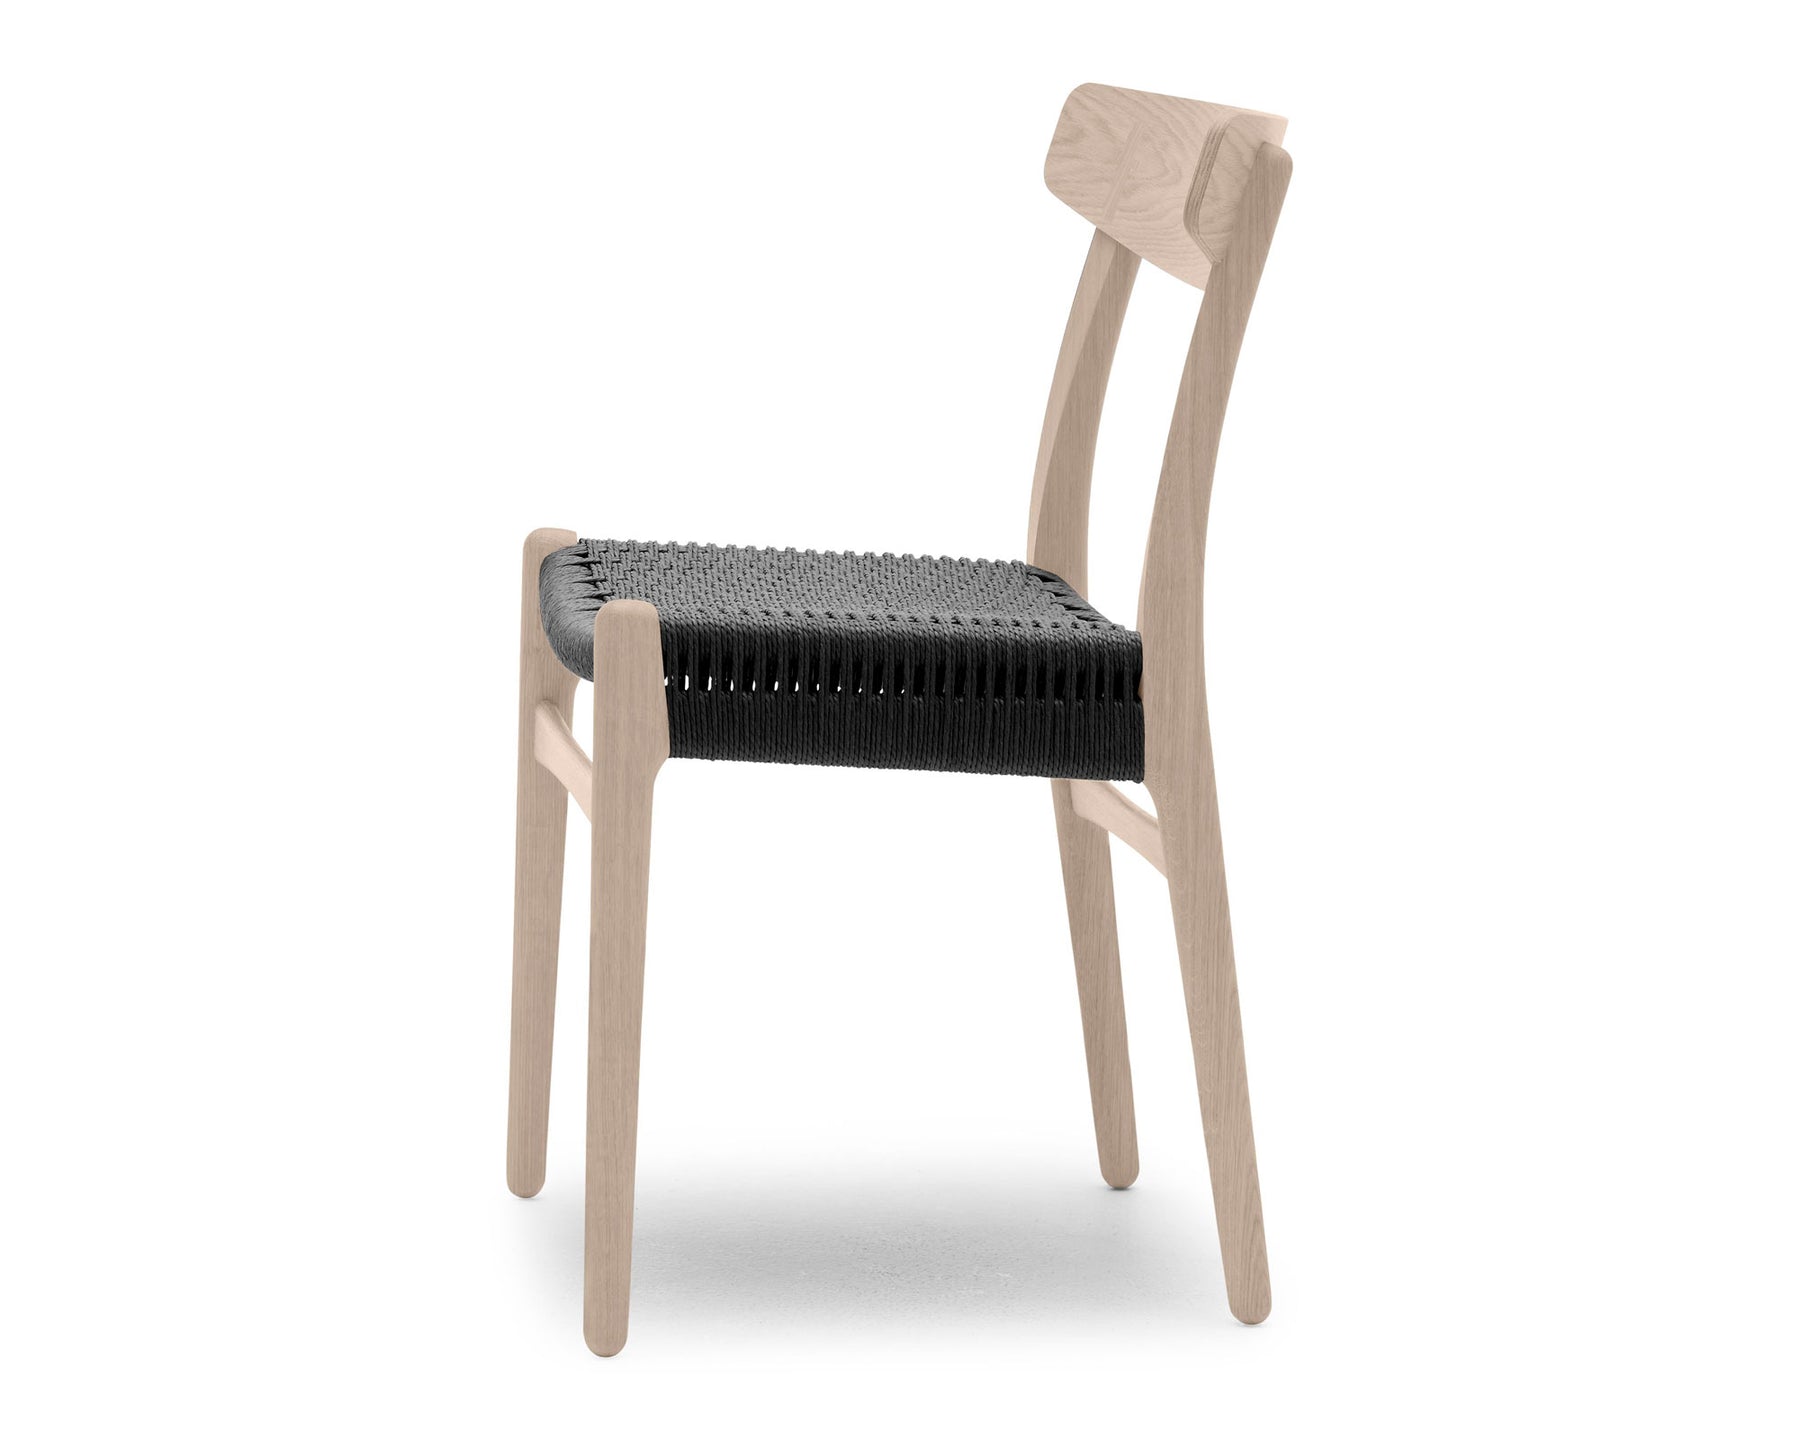 Oak Dining Chair With Black Paper Cord | DSHOP